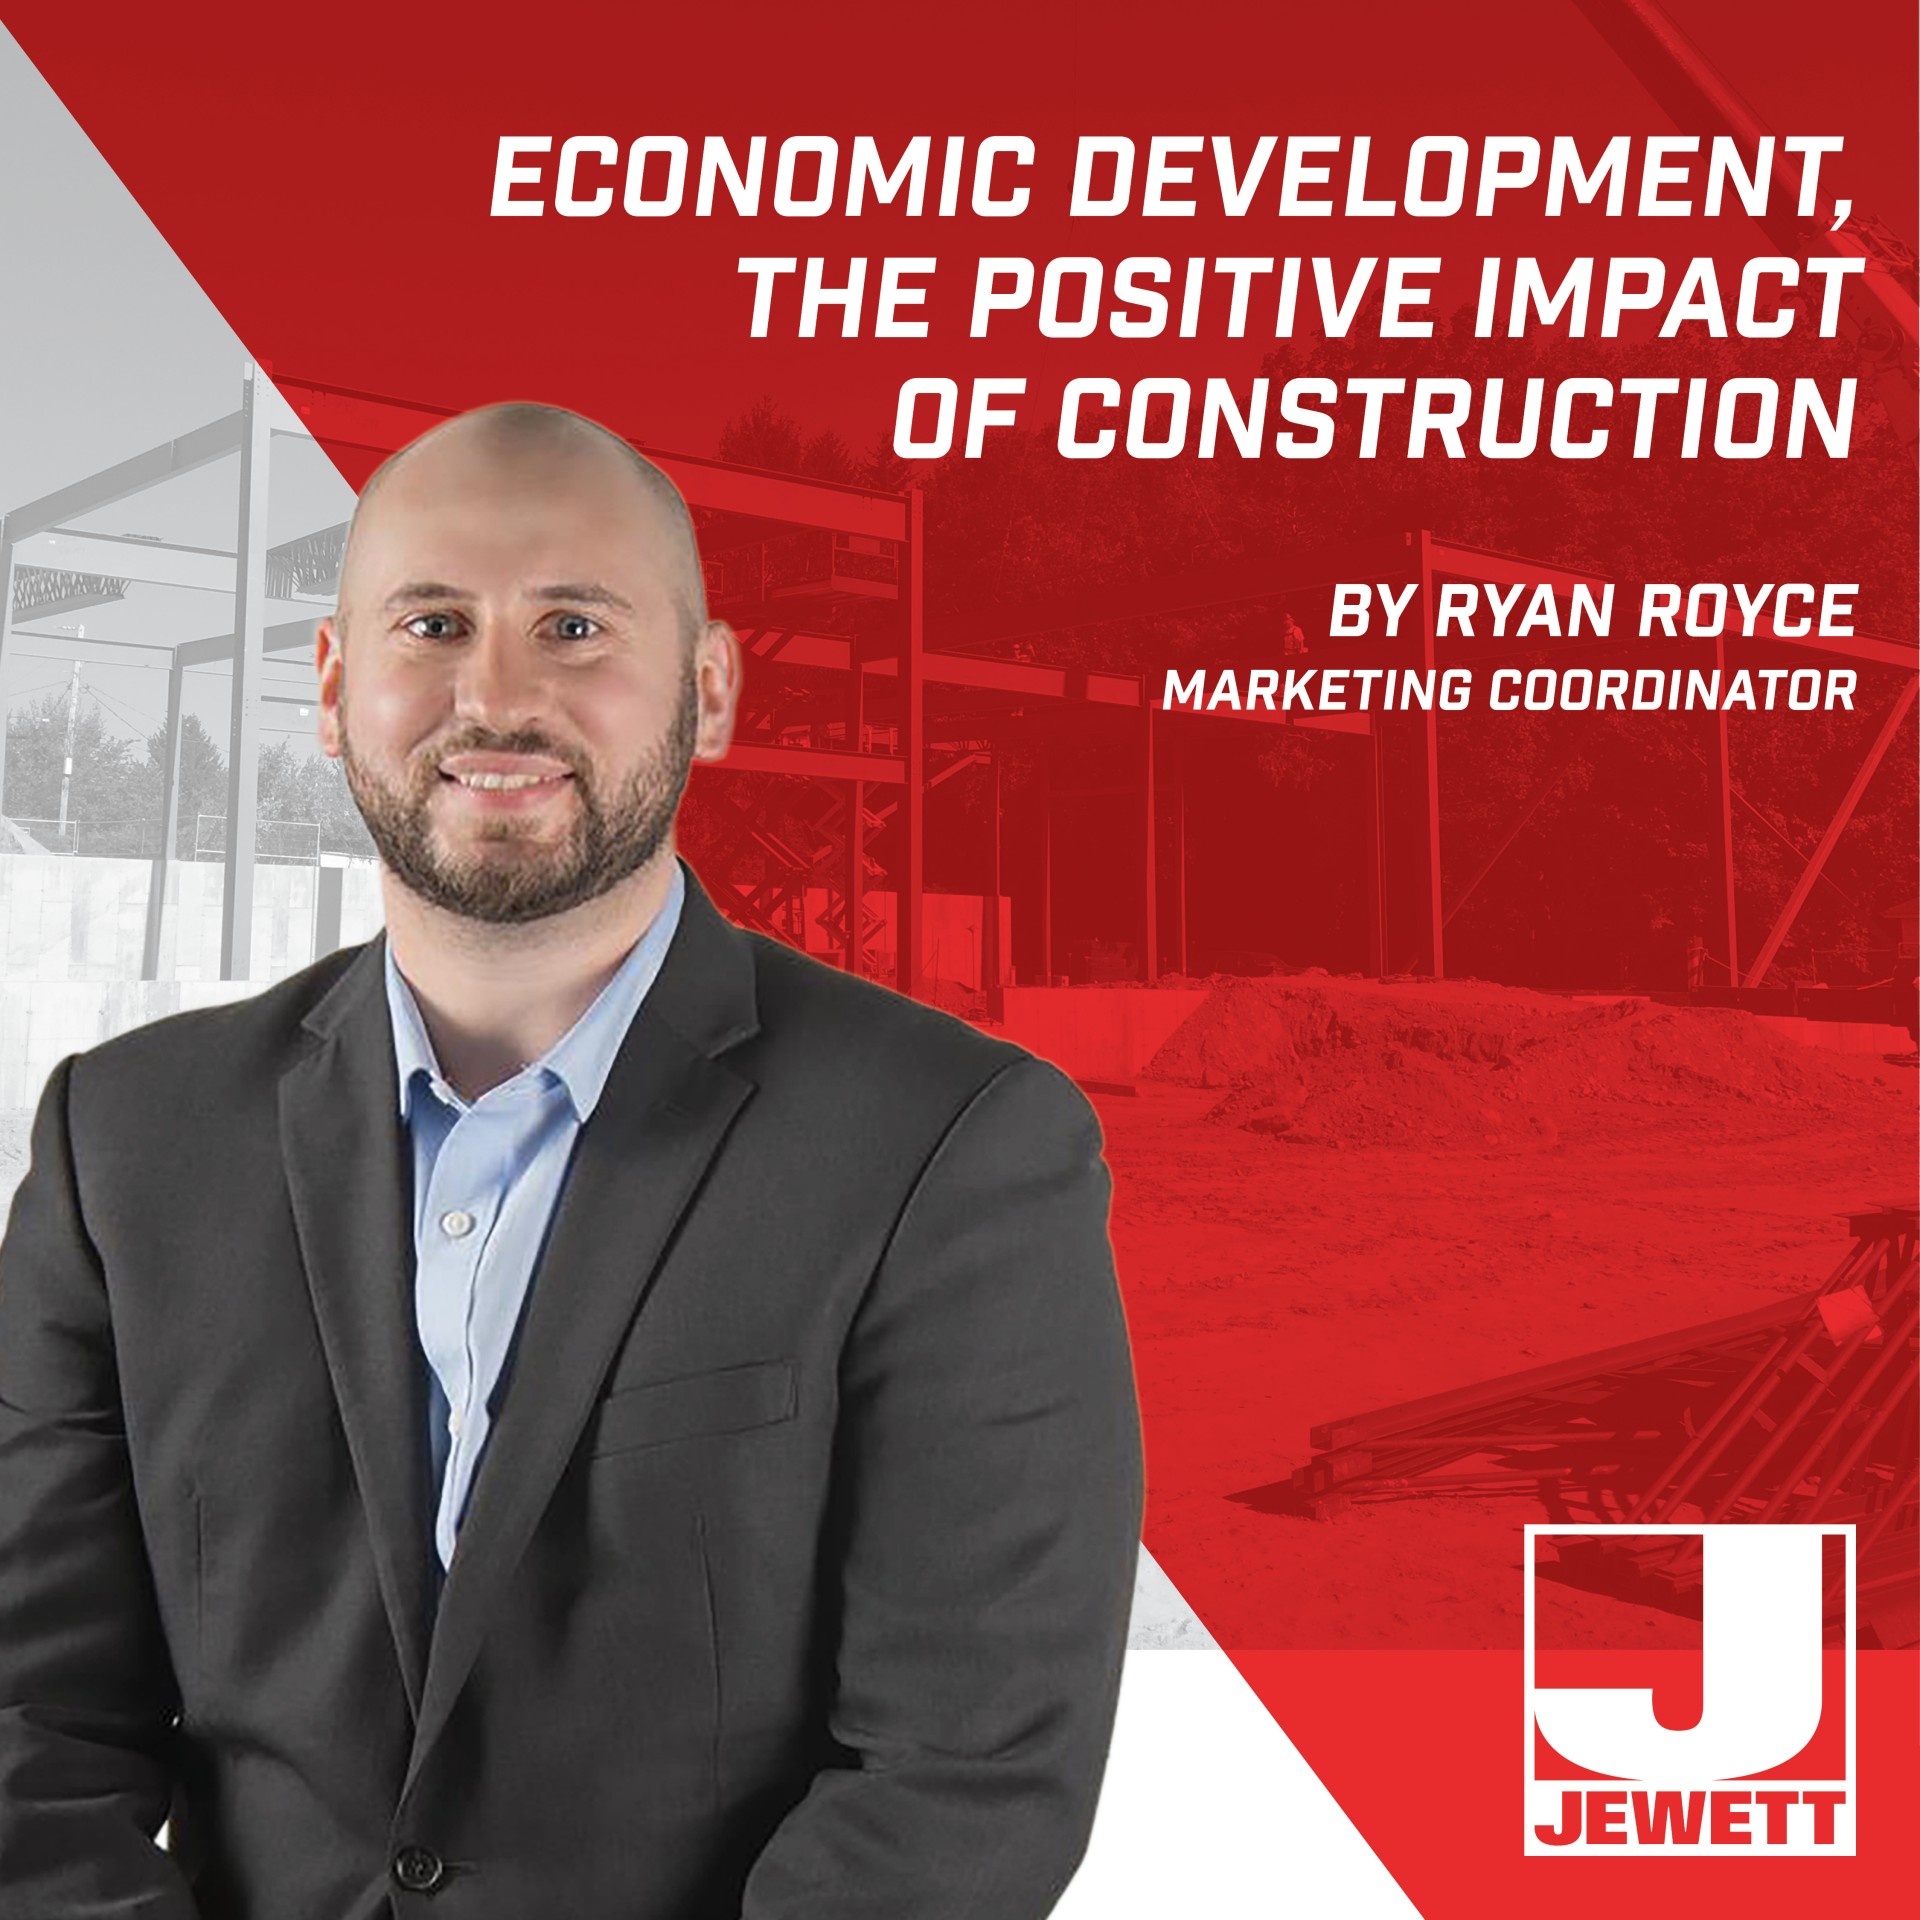 Economic development, and the positive impact a construction project can have on the community